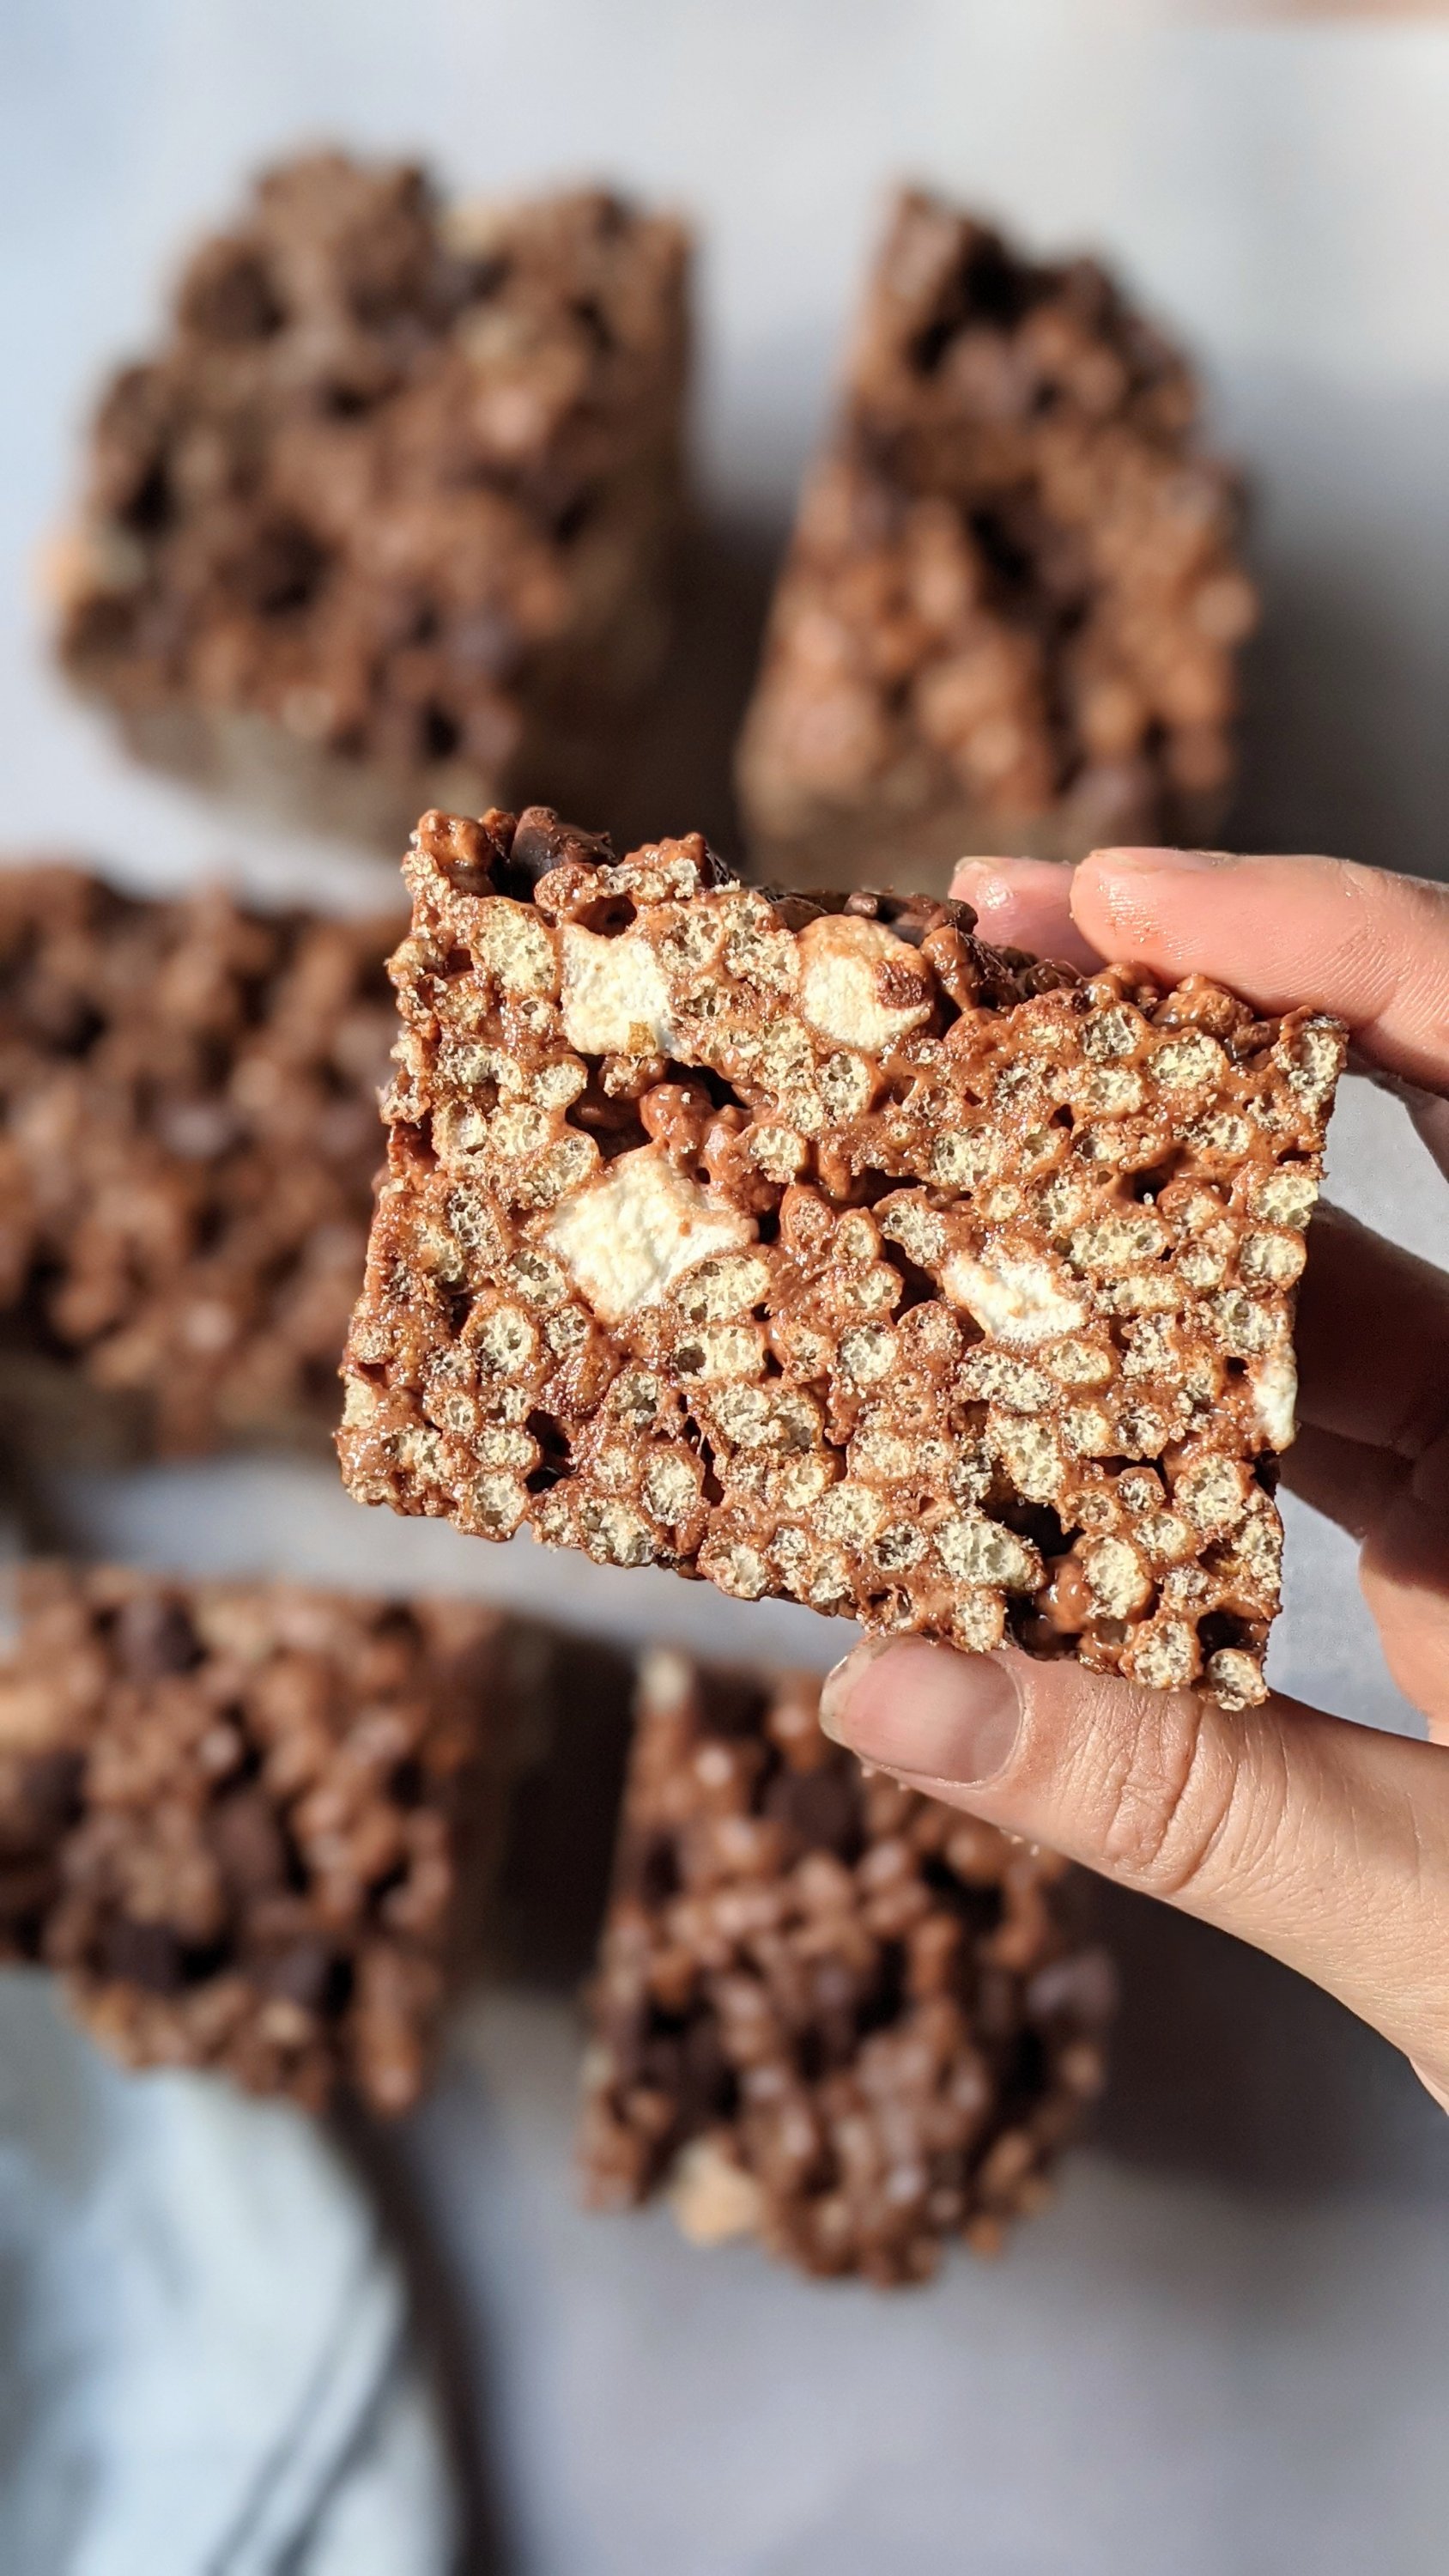 plant based chocolate rice krispie treats recipe vegan gluten free rice crispy cereal treat bars recipe with cocoa powder and brown rice cereal recipes healthy chocolate snacks for summer no glyphosophate or chemicals